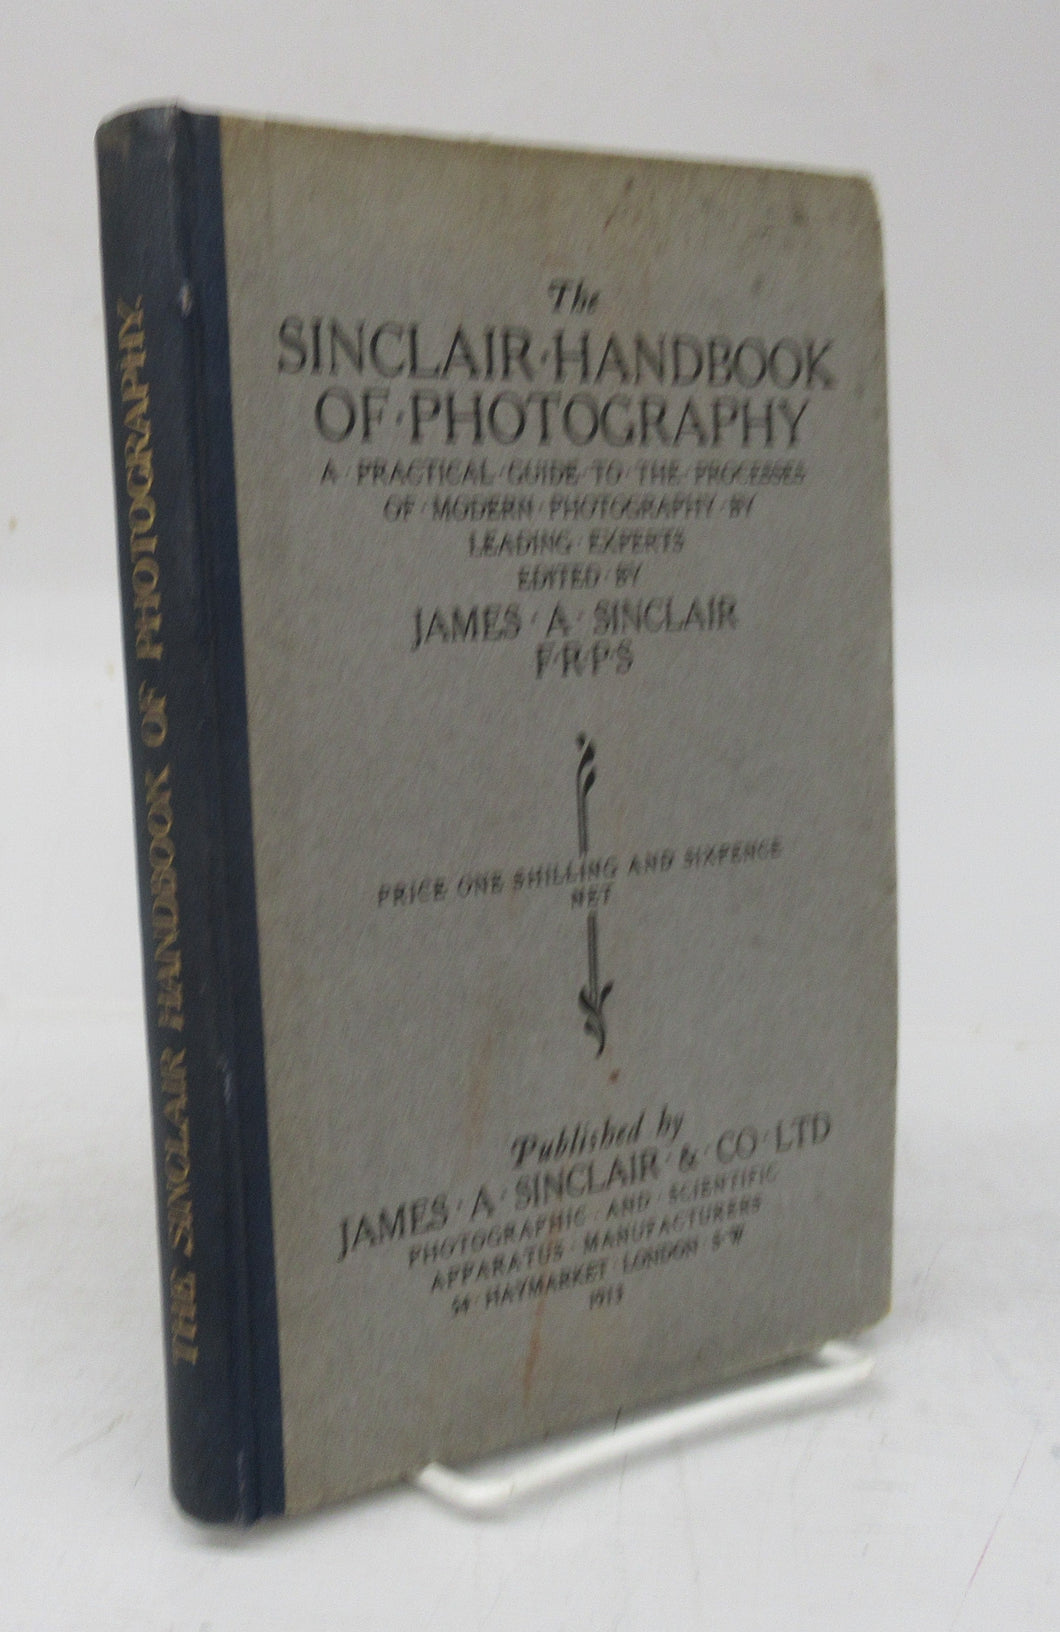 The Sinclair Handbook of Photography: A Practical Guide to the Processes of Modern Photography by Leading Experts